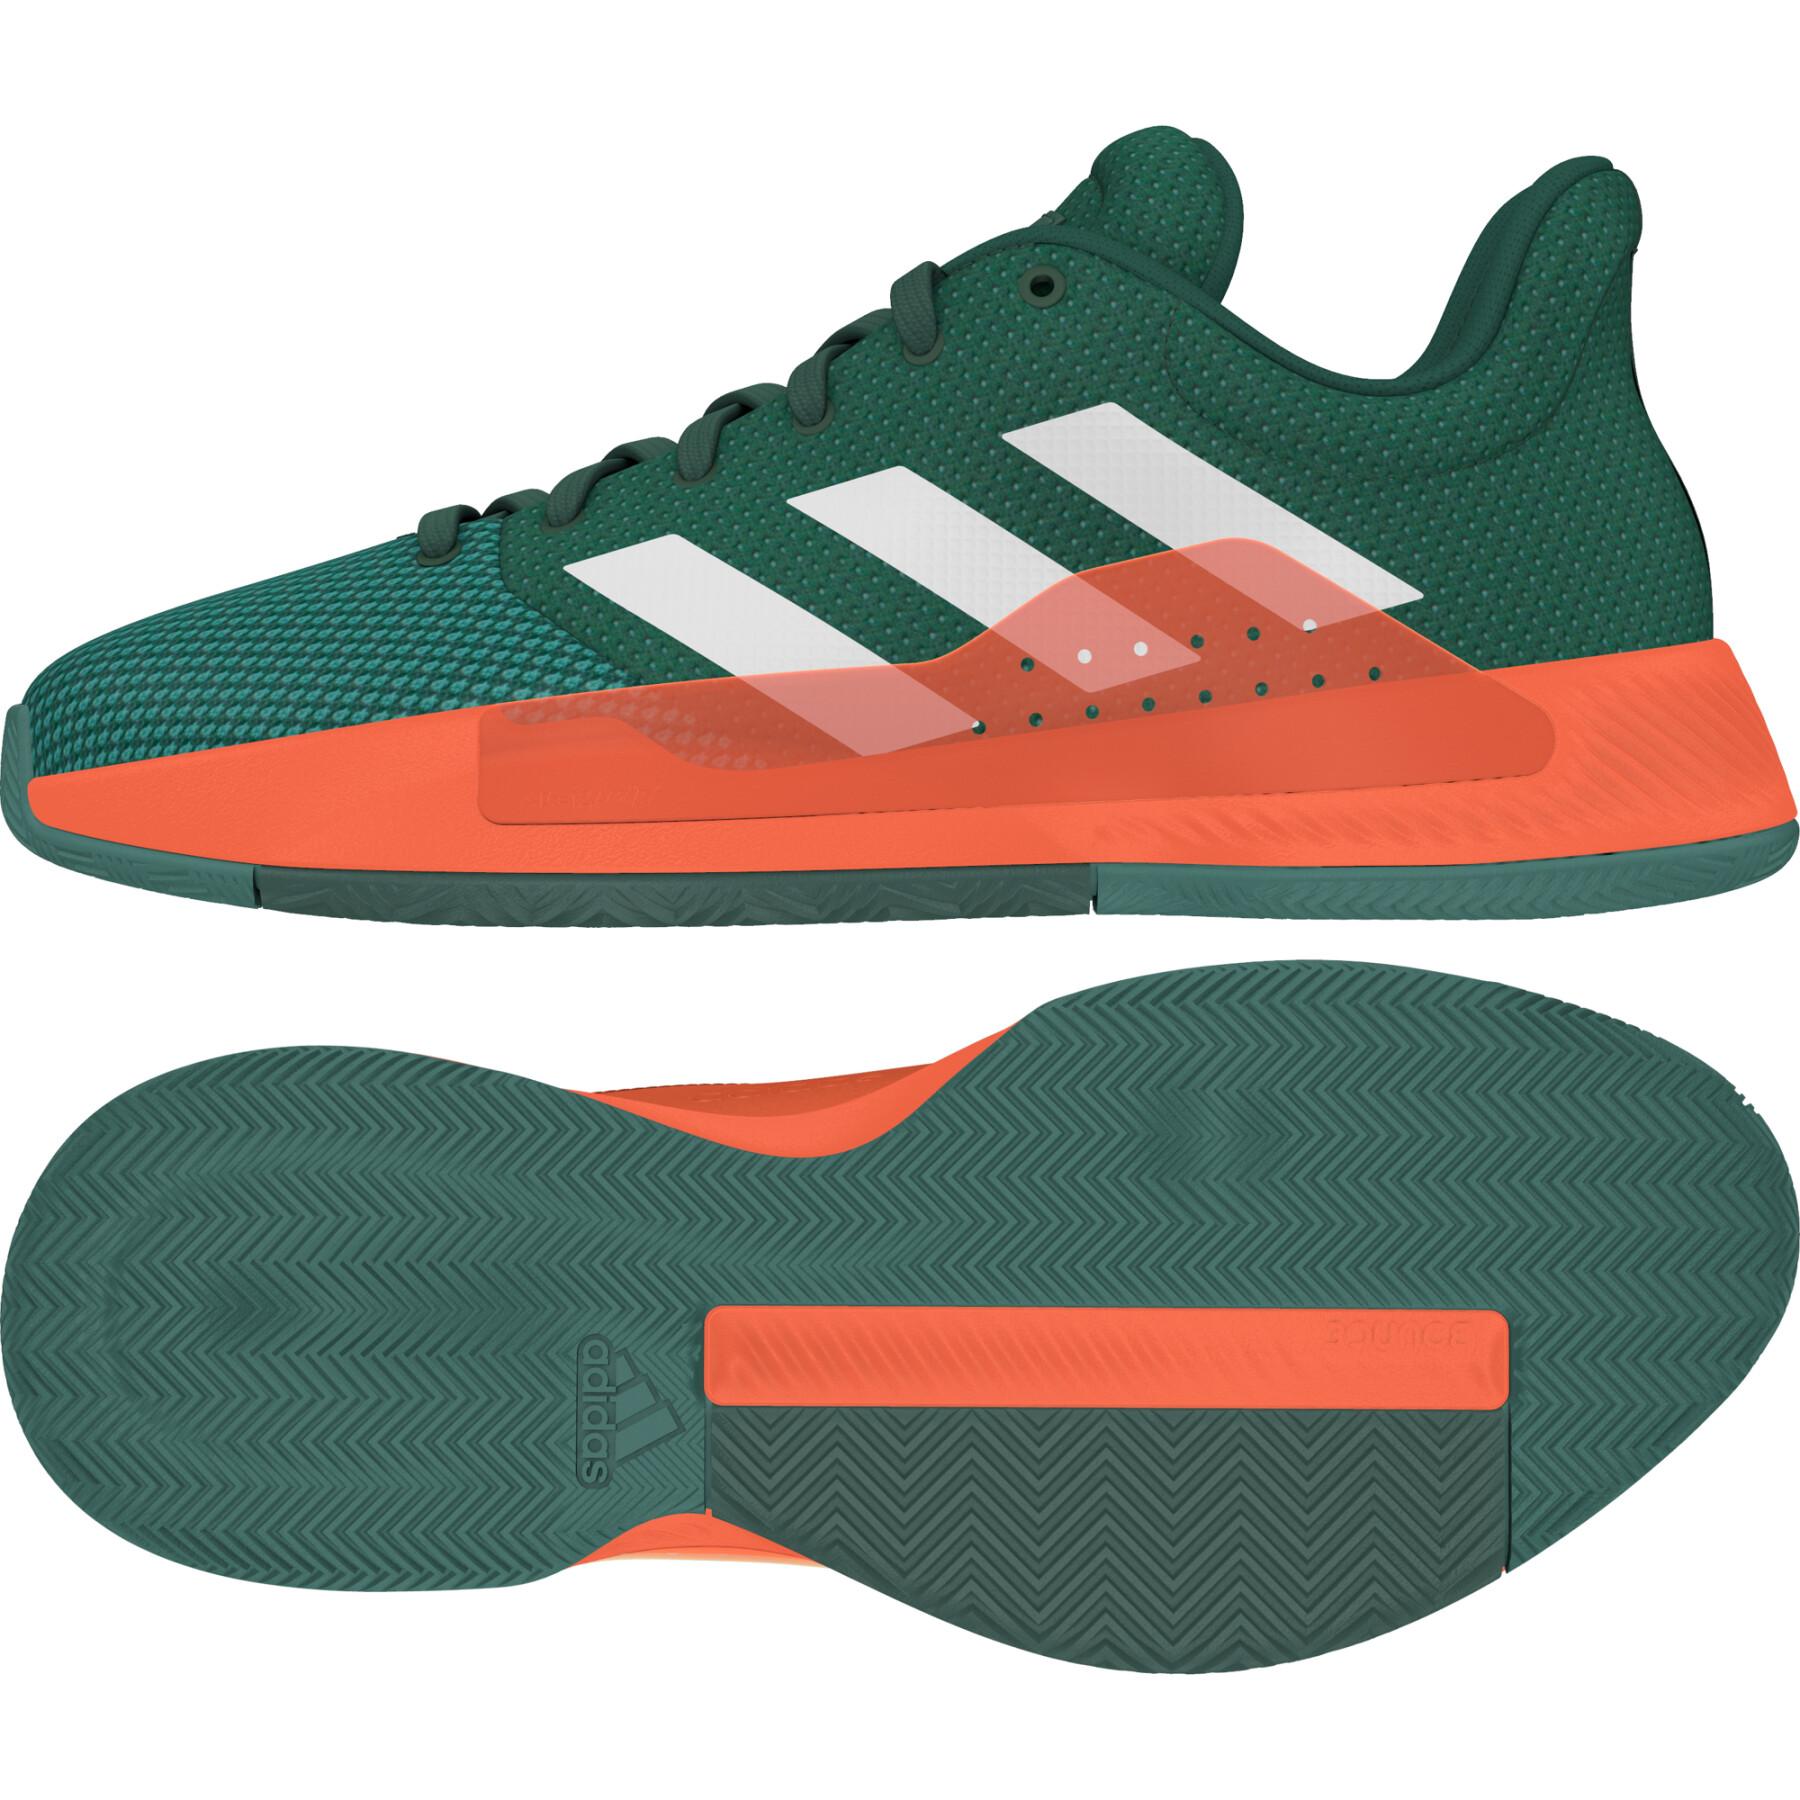 Chaussures indoor adidas Pro bounce madness 2019